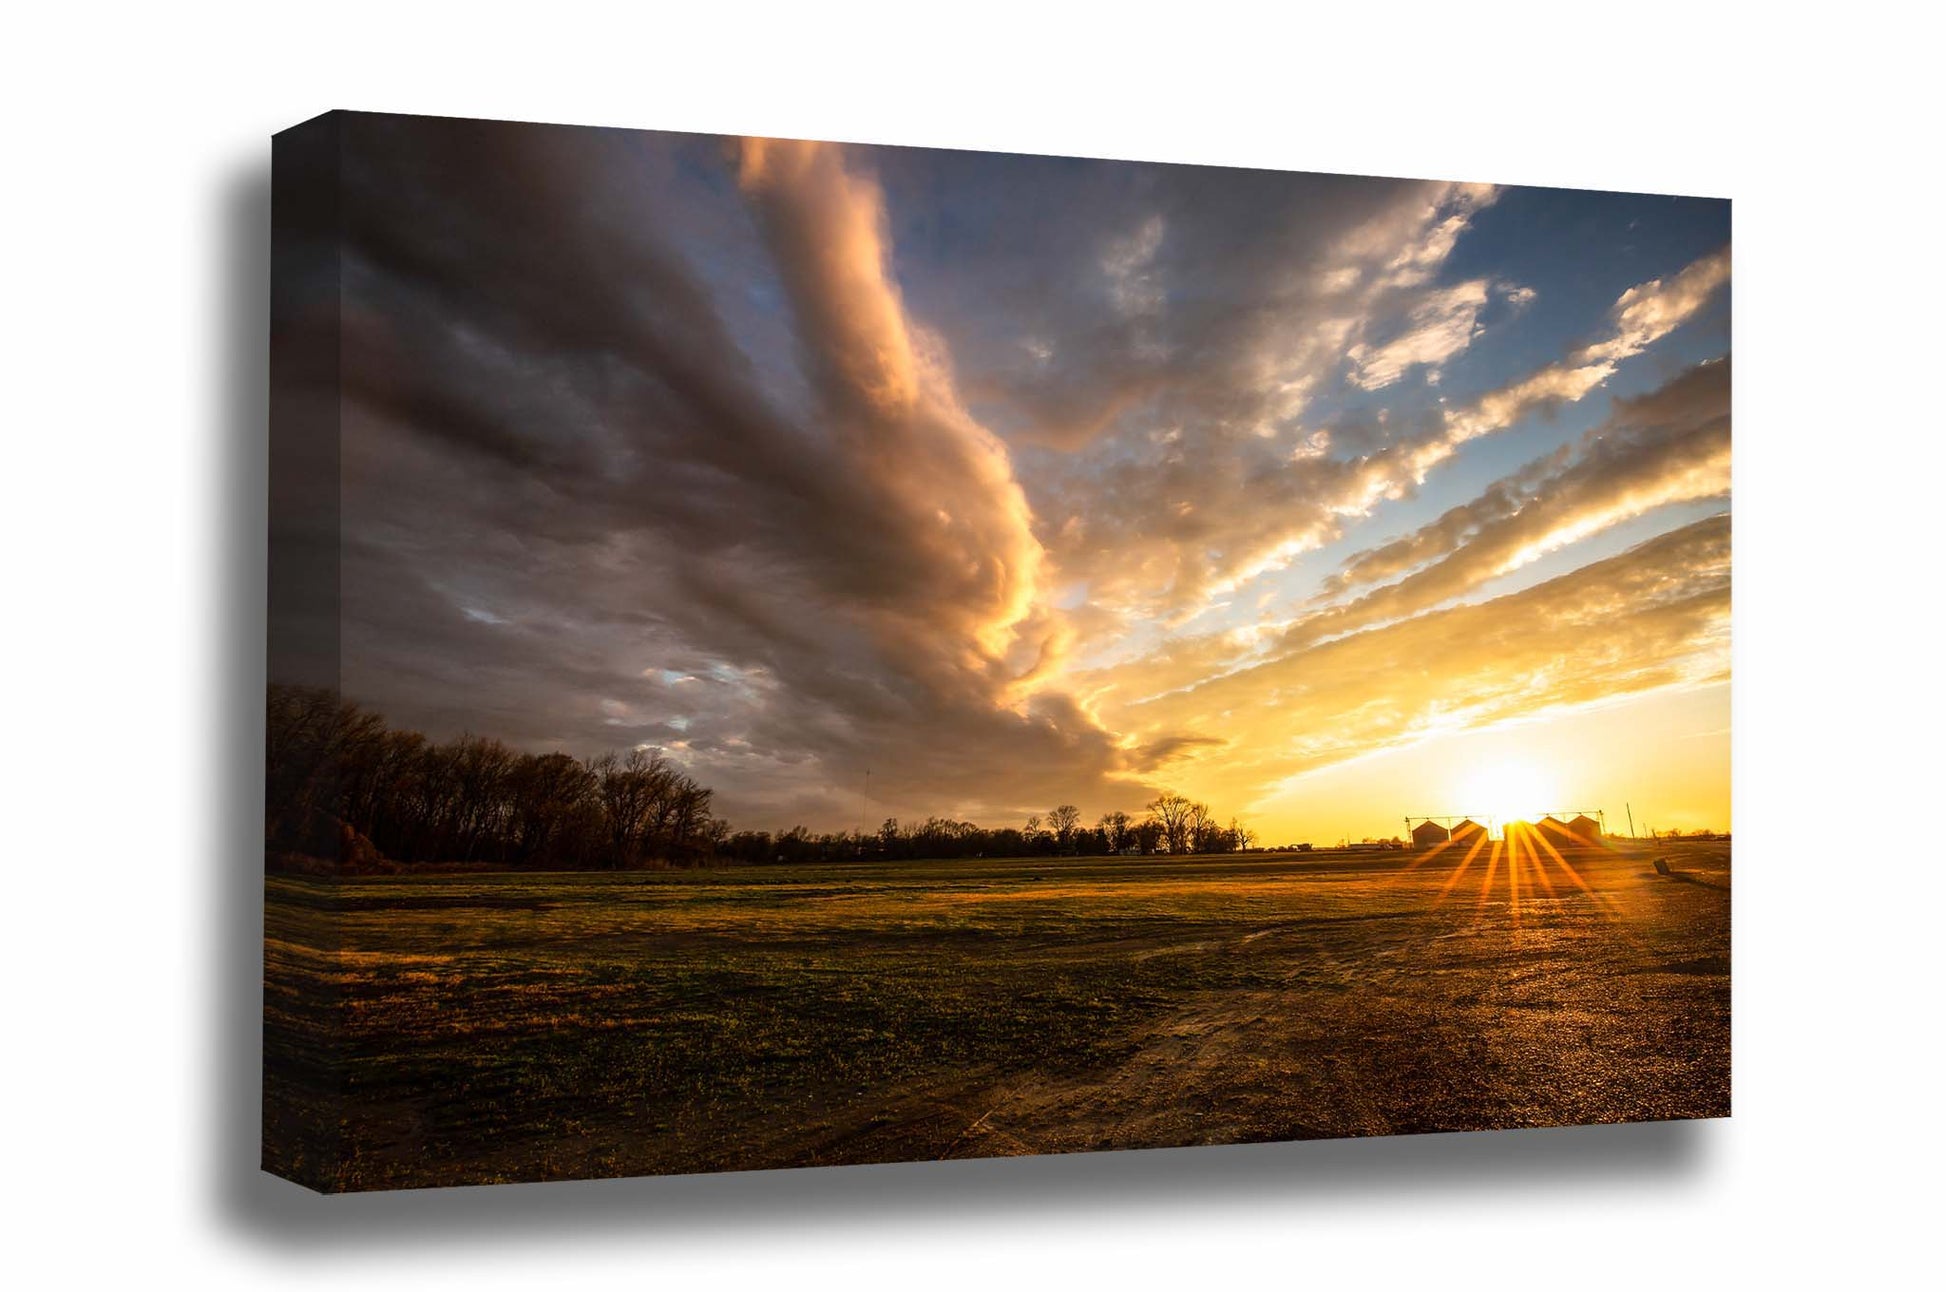 Southeastern canvas wall art of a warm sunset over a farm after a stormy day in the Mississippi Delta in Mississippi by Sean Ramsey of Southern Plains Photography.